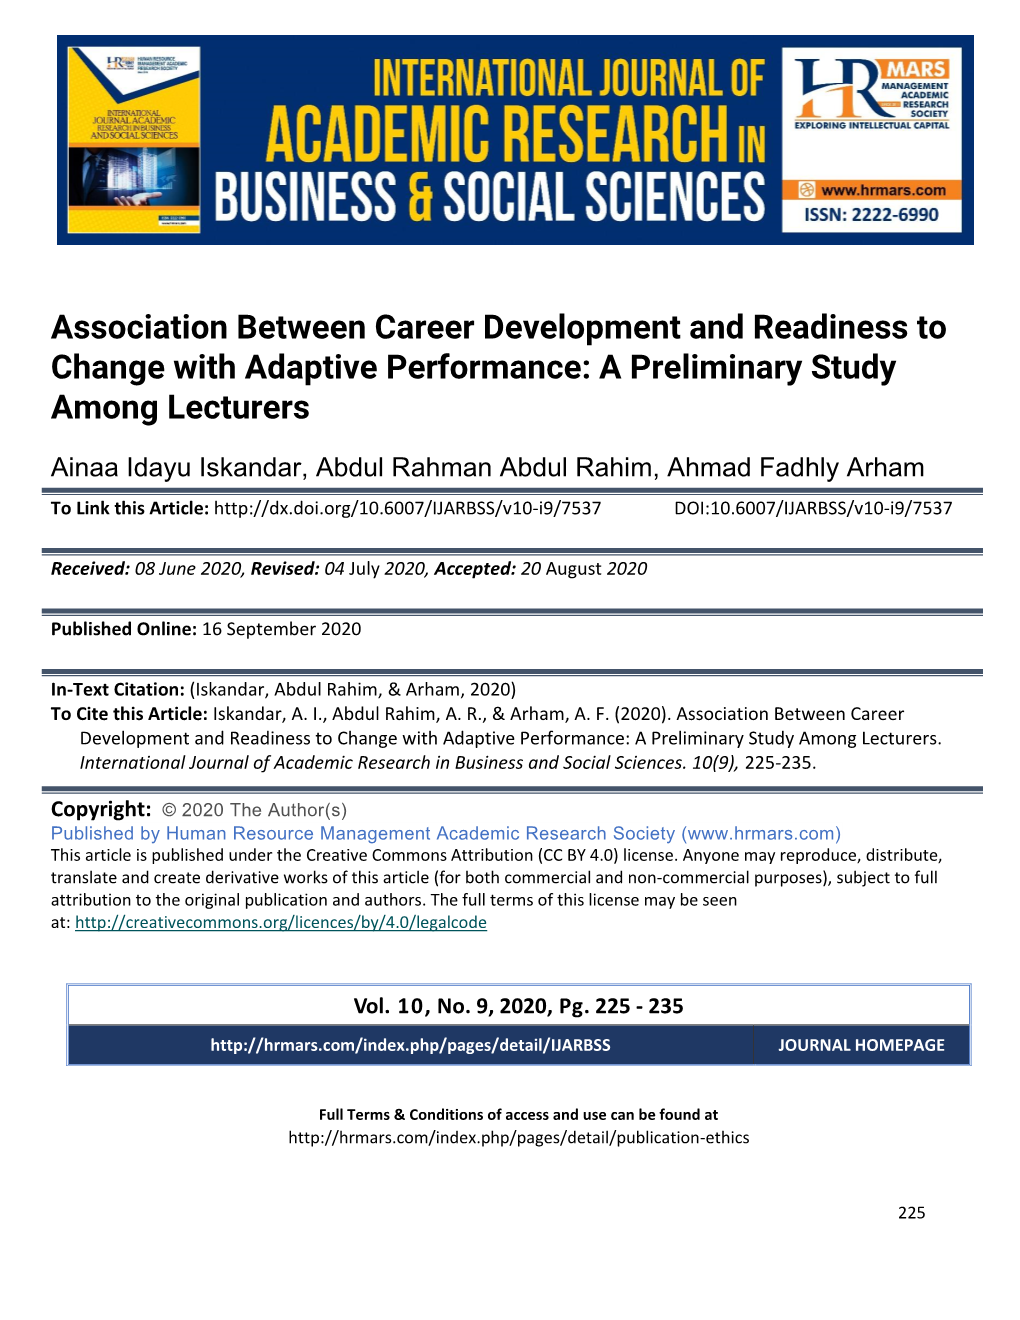 Association Between Career Development and Readiness to Change with Adaptive Performance: a Preliminary Study Among Lecturers